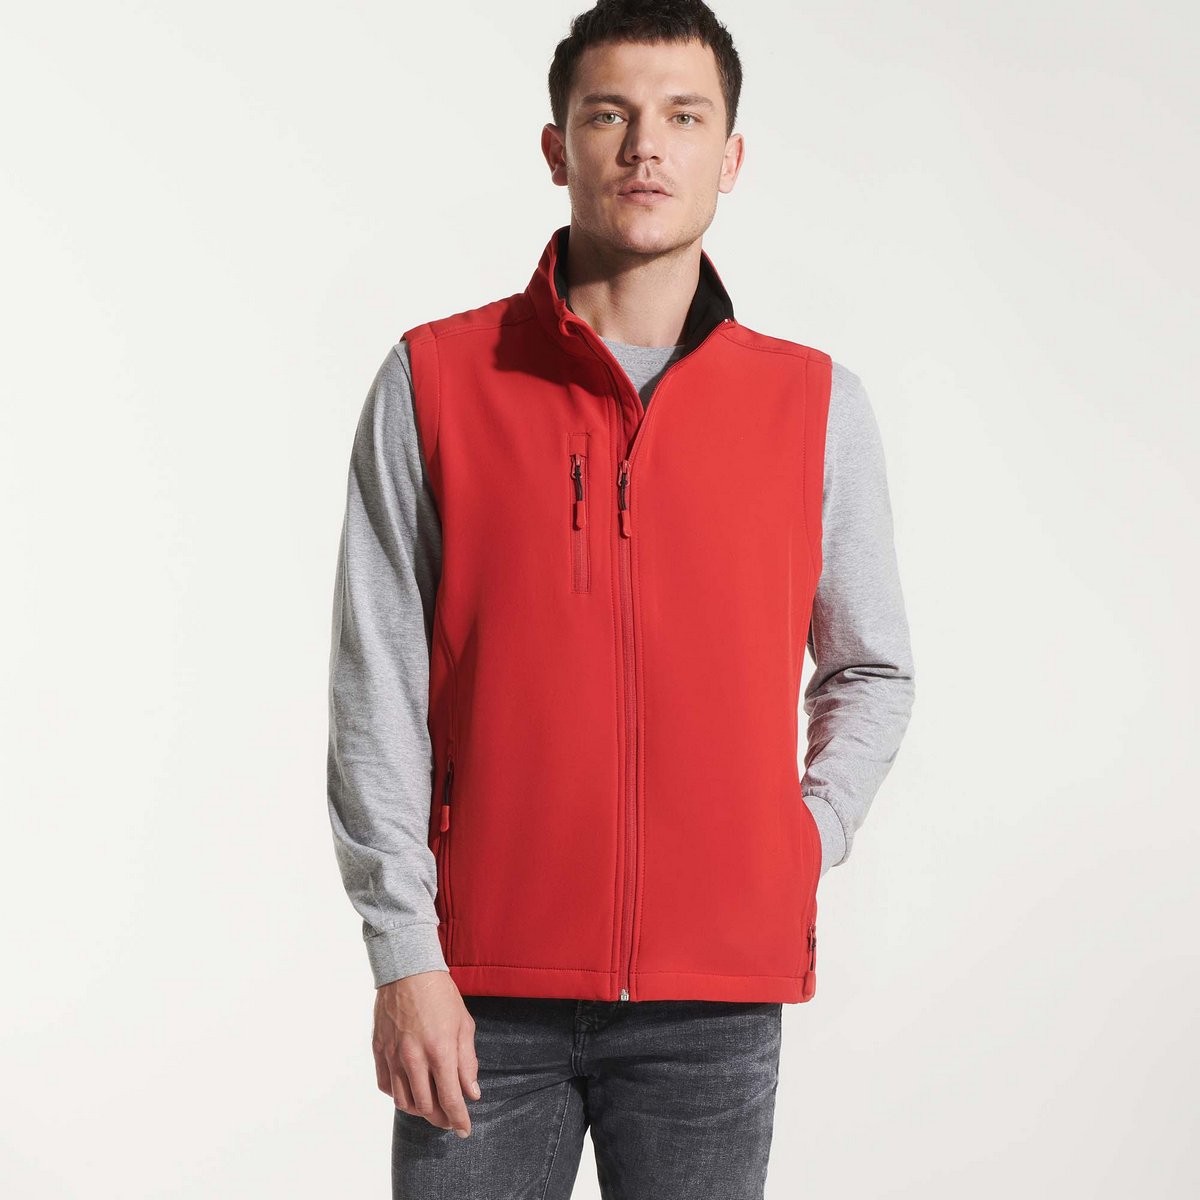 Chaleco Roly Quebec 6438 Hombre Softshell – Ropa Laboral Andorra